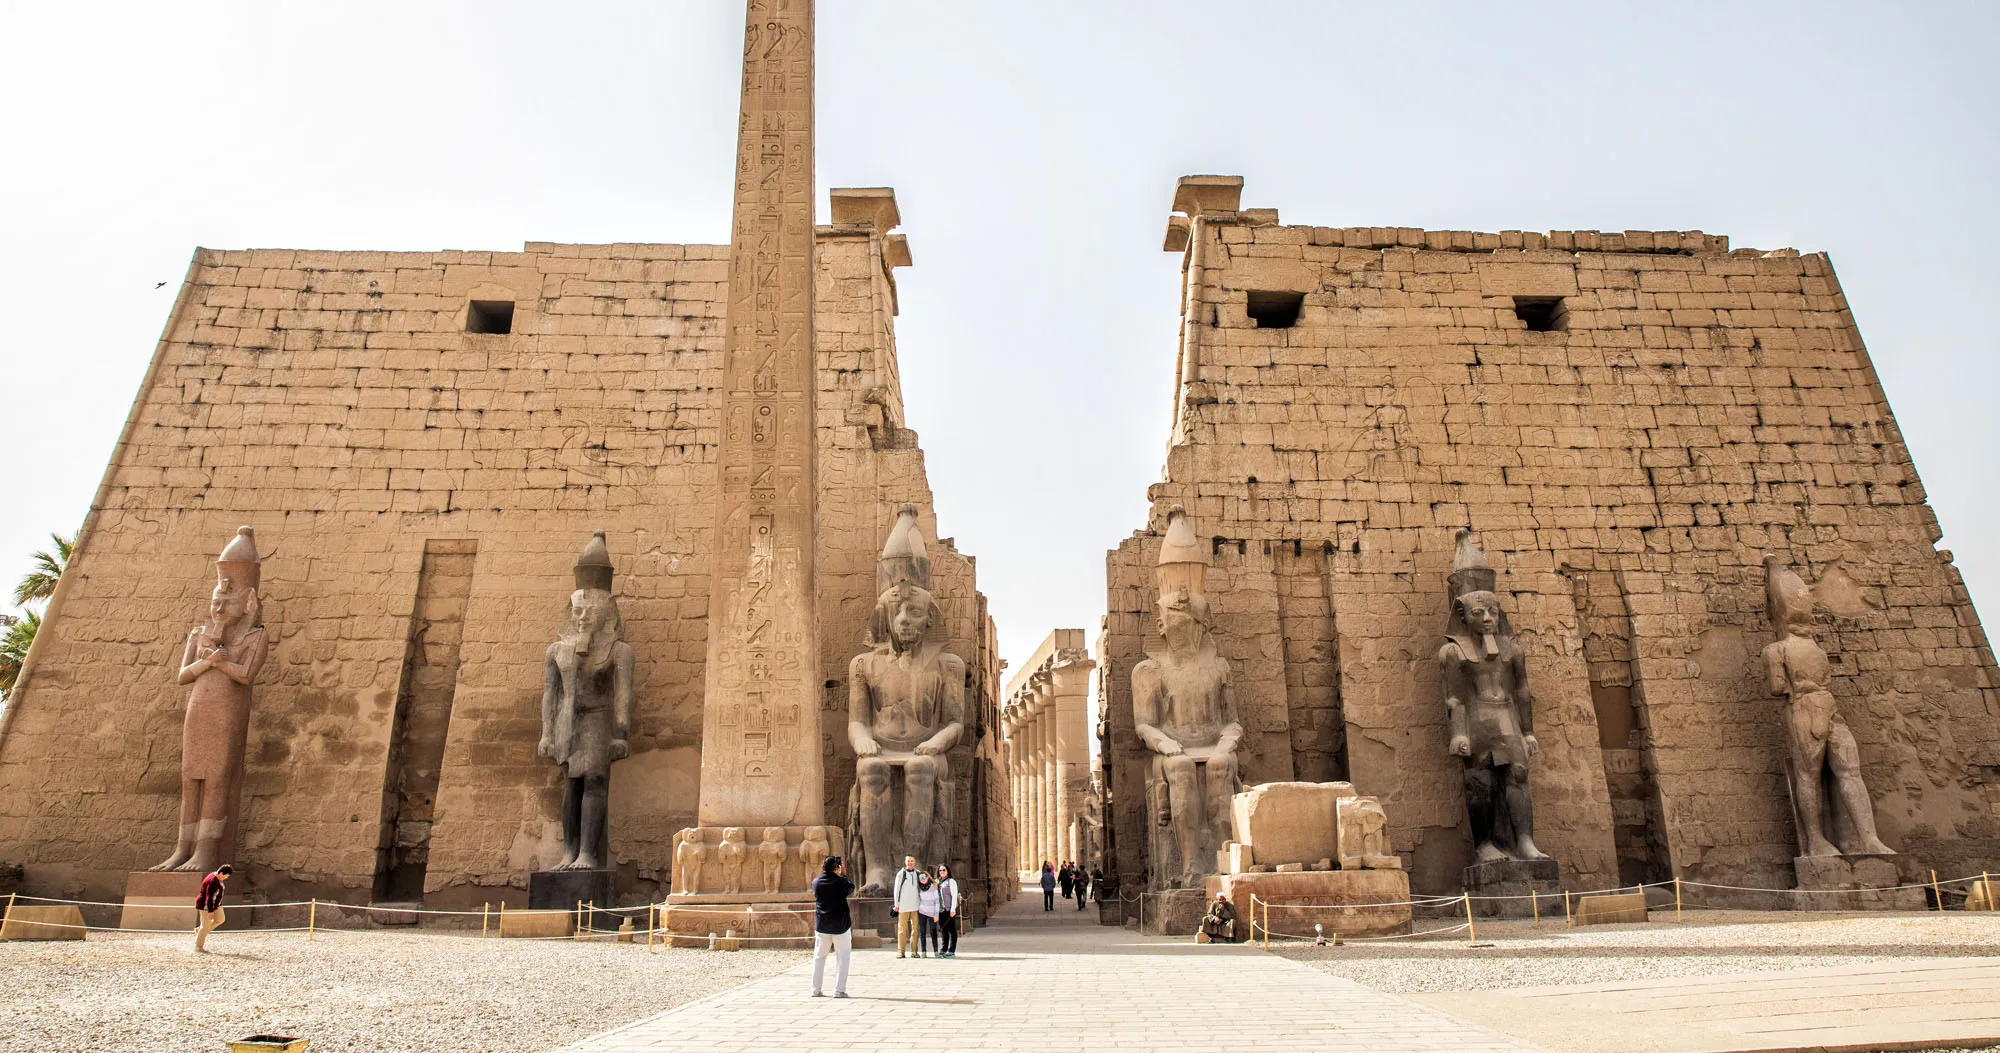 Featured image for “Complete Guide to the East Bank of Luxor, Egypt”